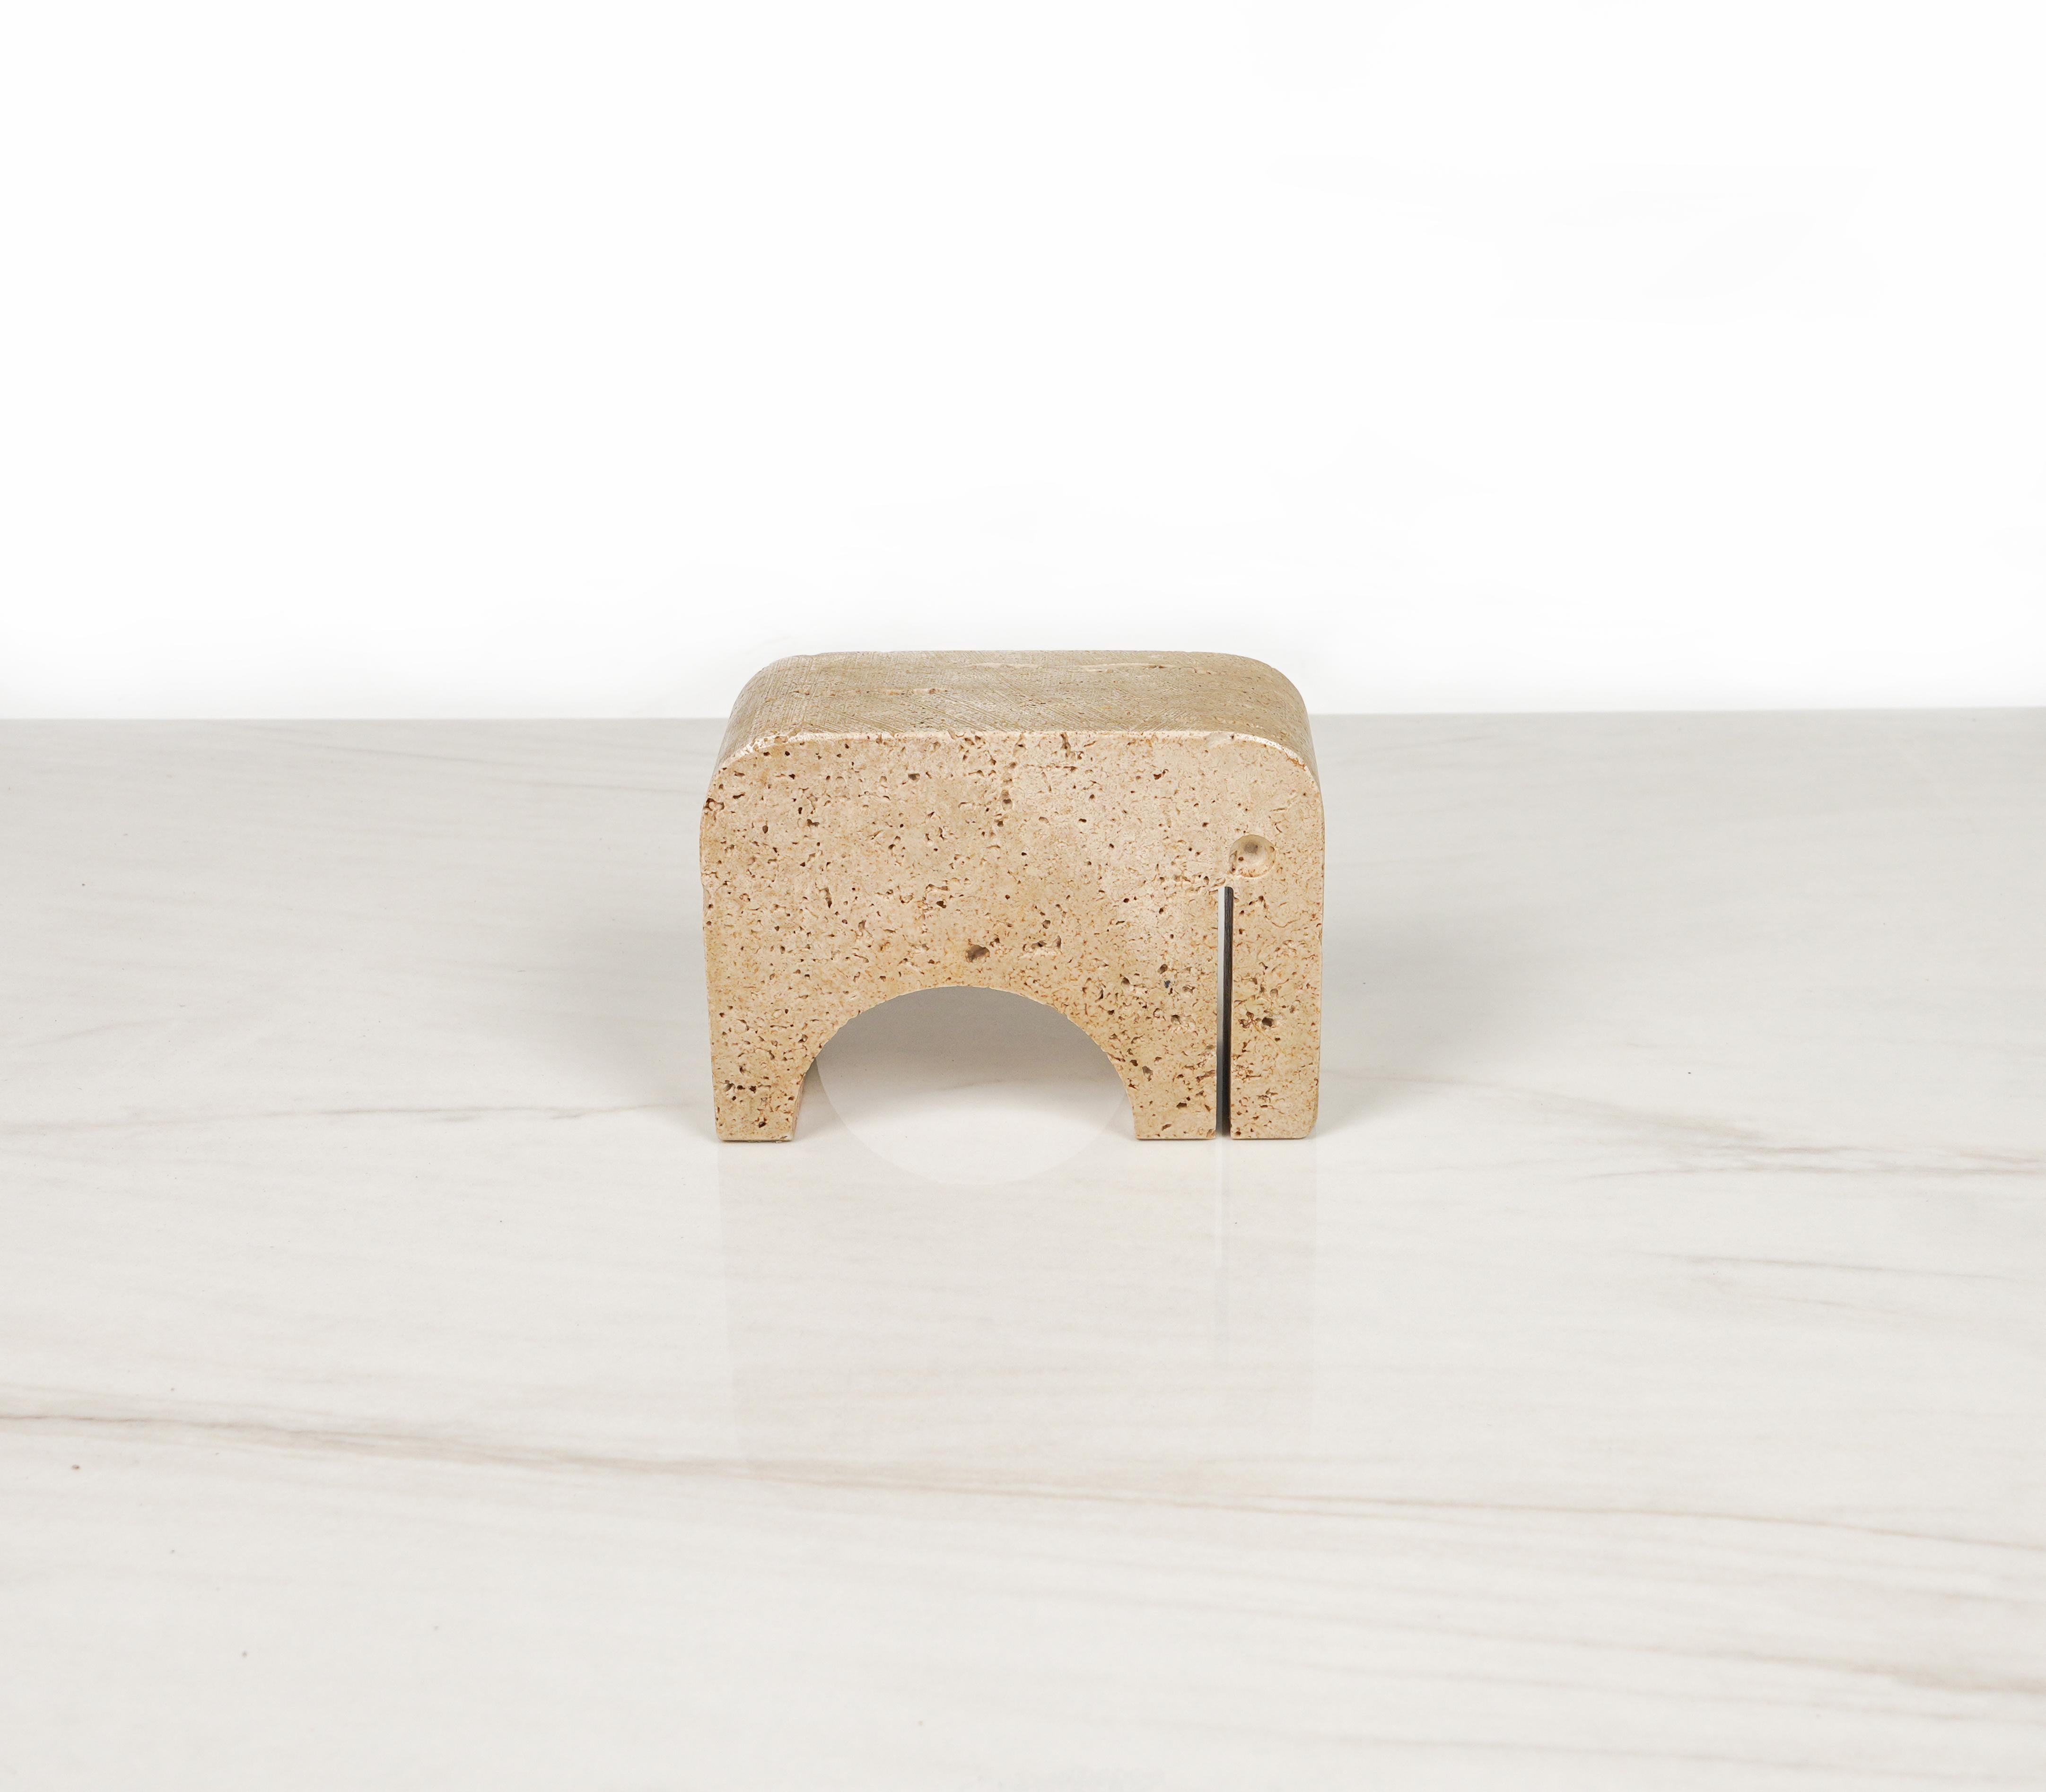 Travertine Elephant Sculpture / Bookend by Fratelli Mannelli, Italy 1970s For Sale 1